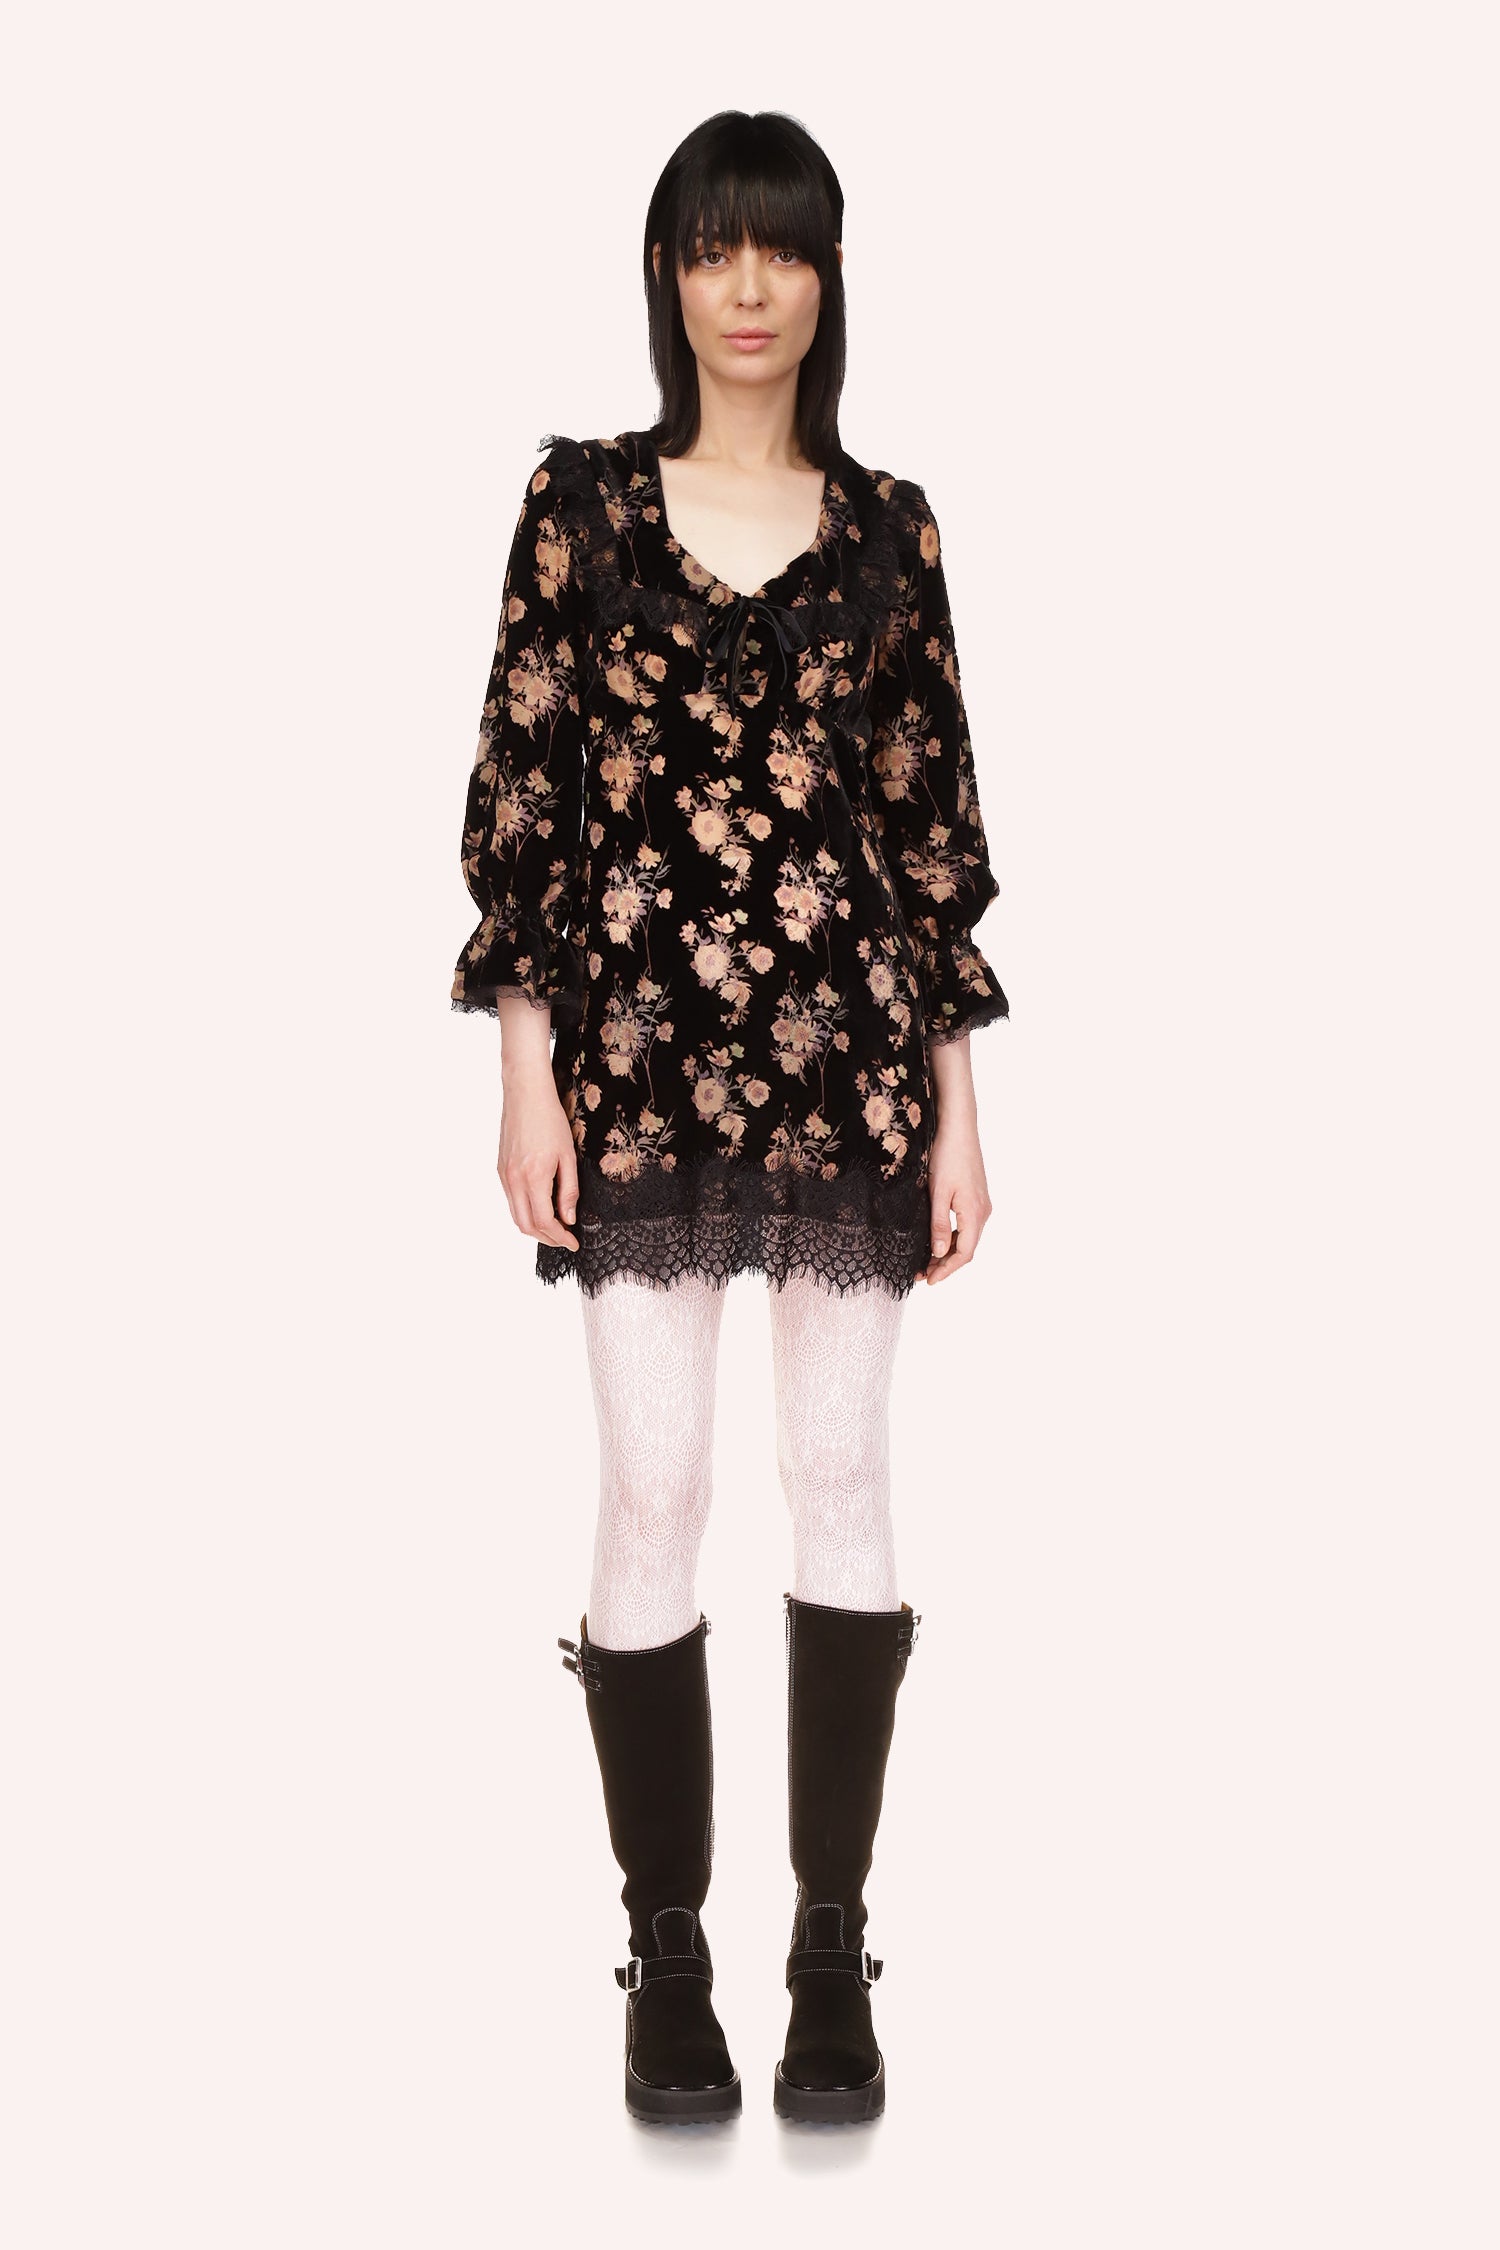 Black dress with beige floral pattern, V-shaped collar, long sleeves, black lace at collar and hem